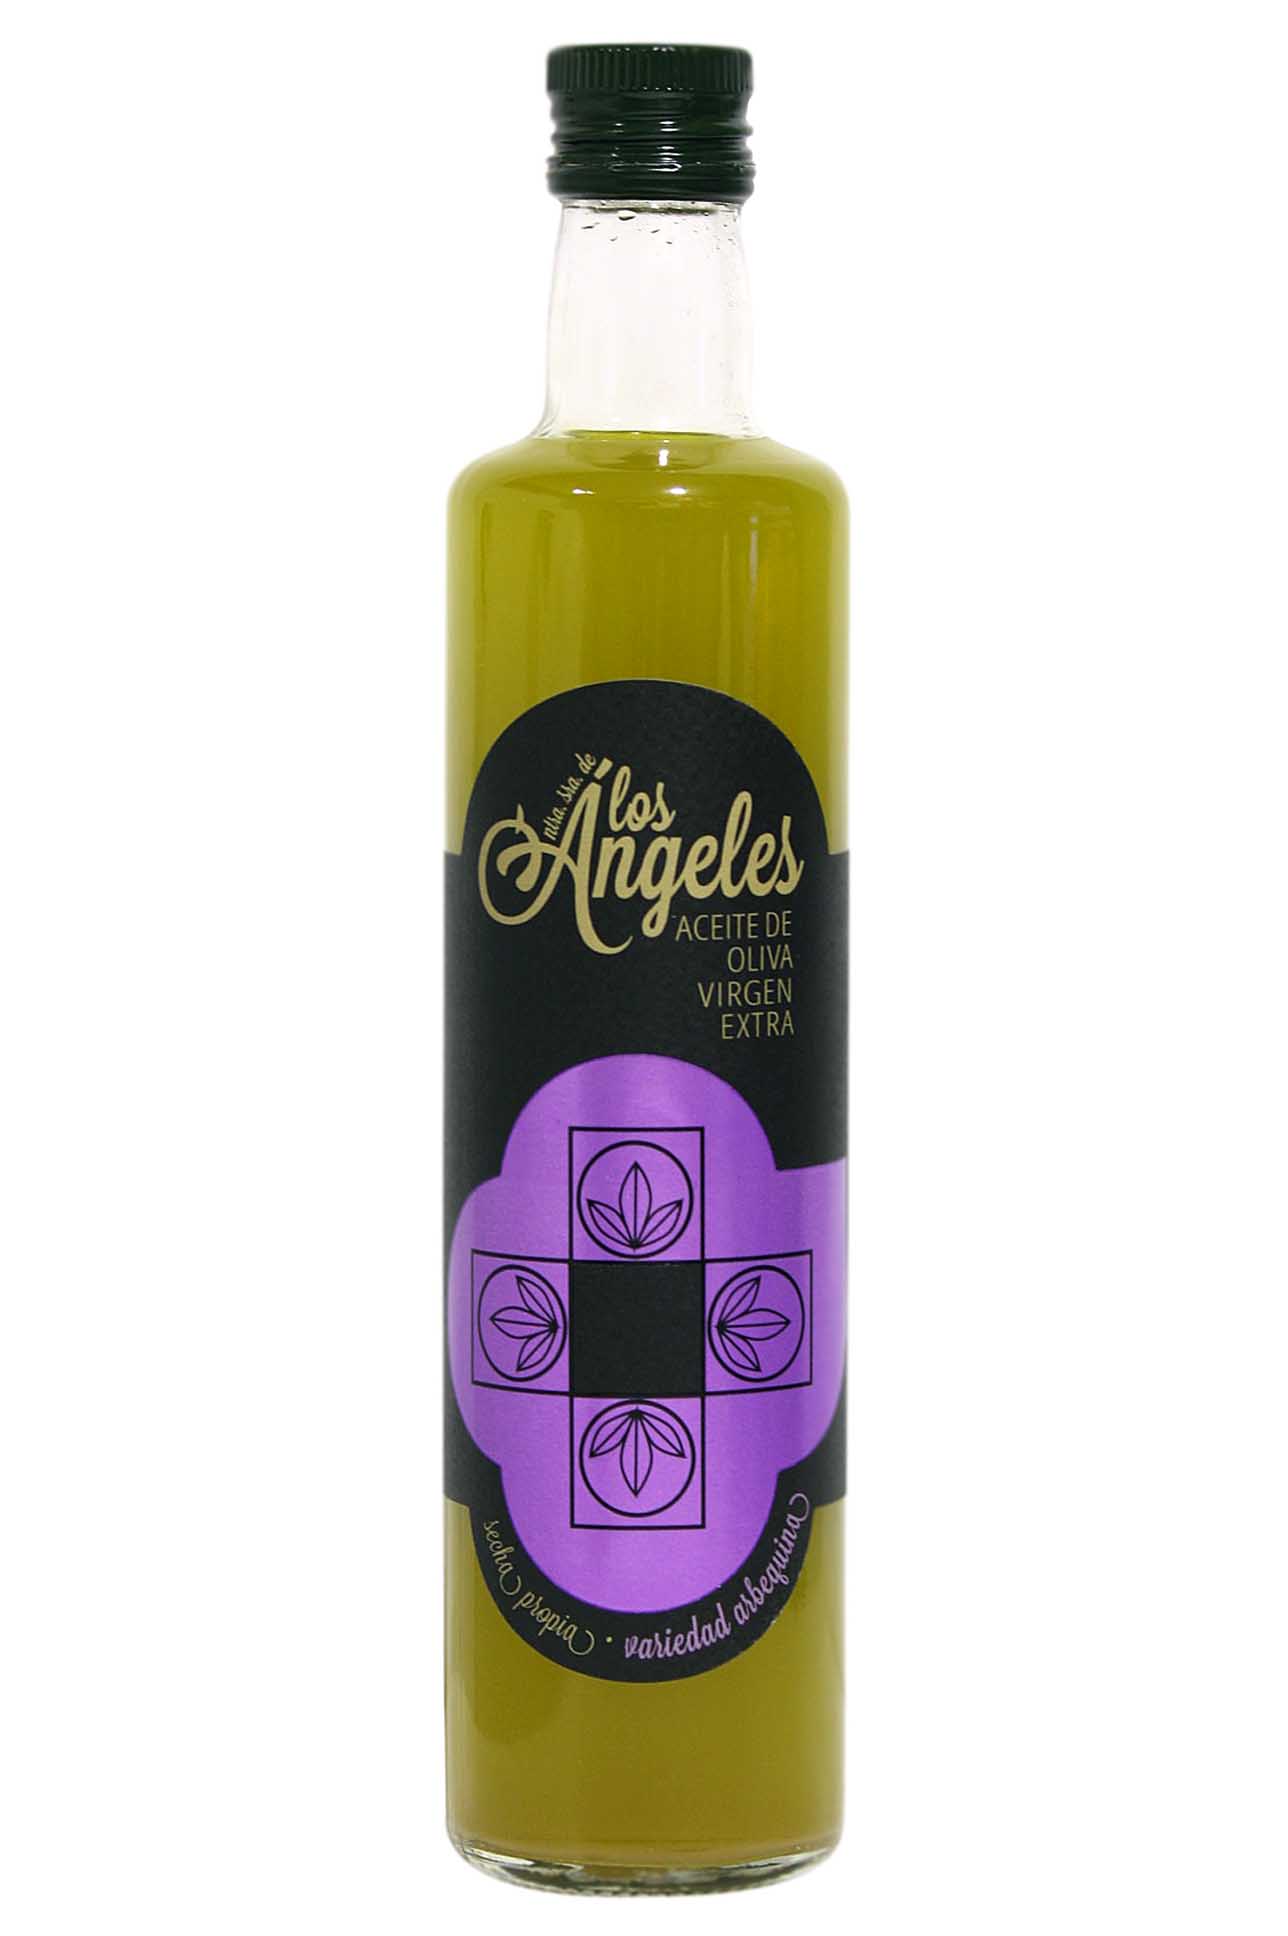 Arbequina extra olive oil